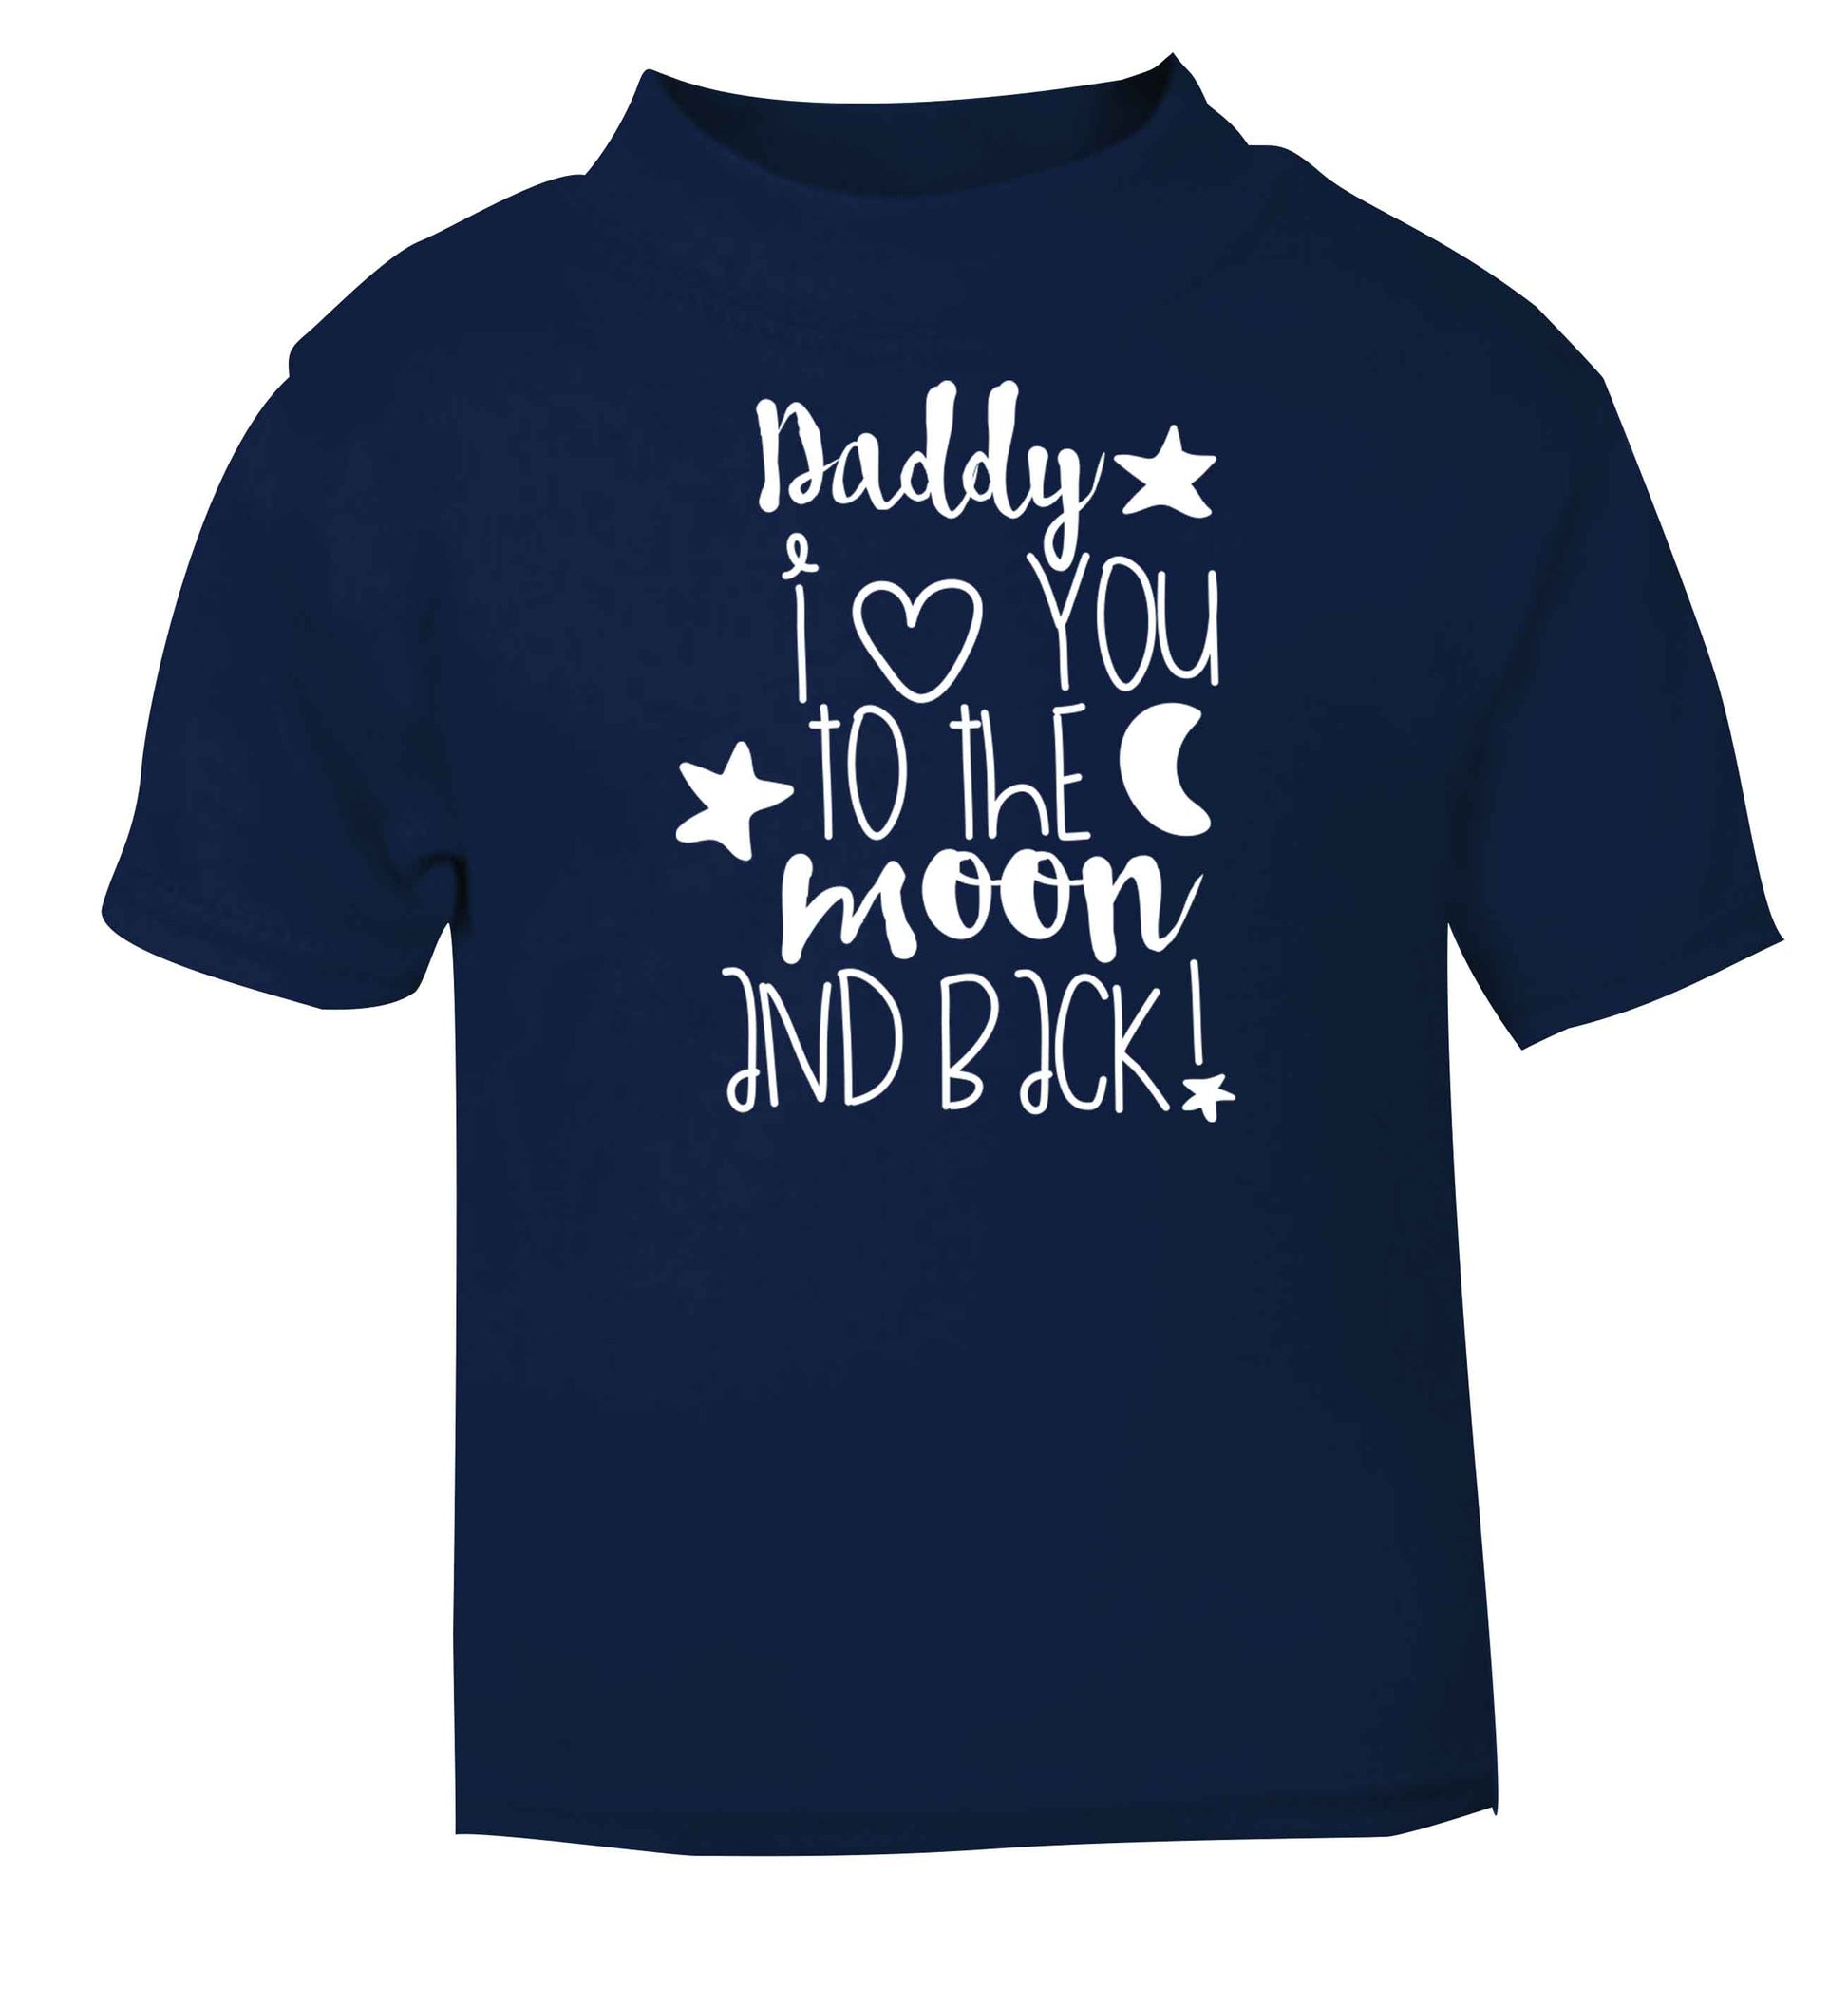 Daddy I love you to the moon and back navy baby toddler Tshirt 2 Years